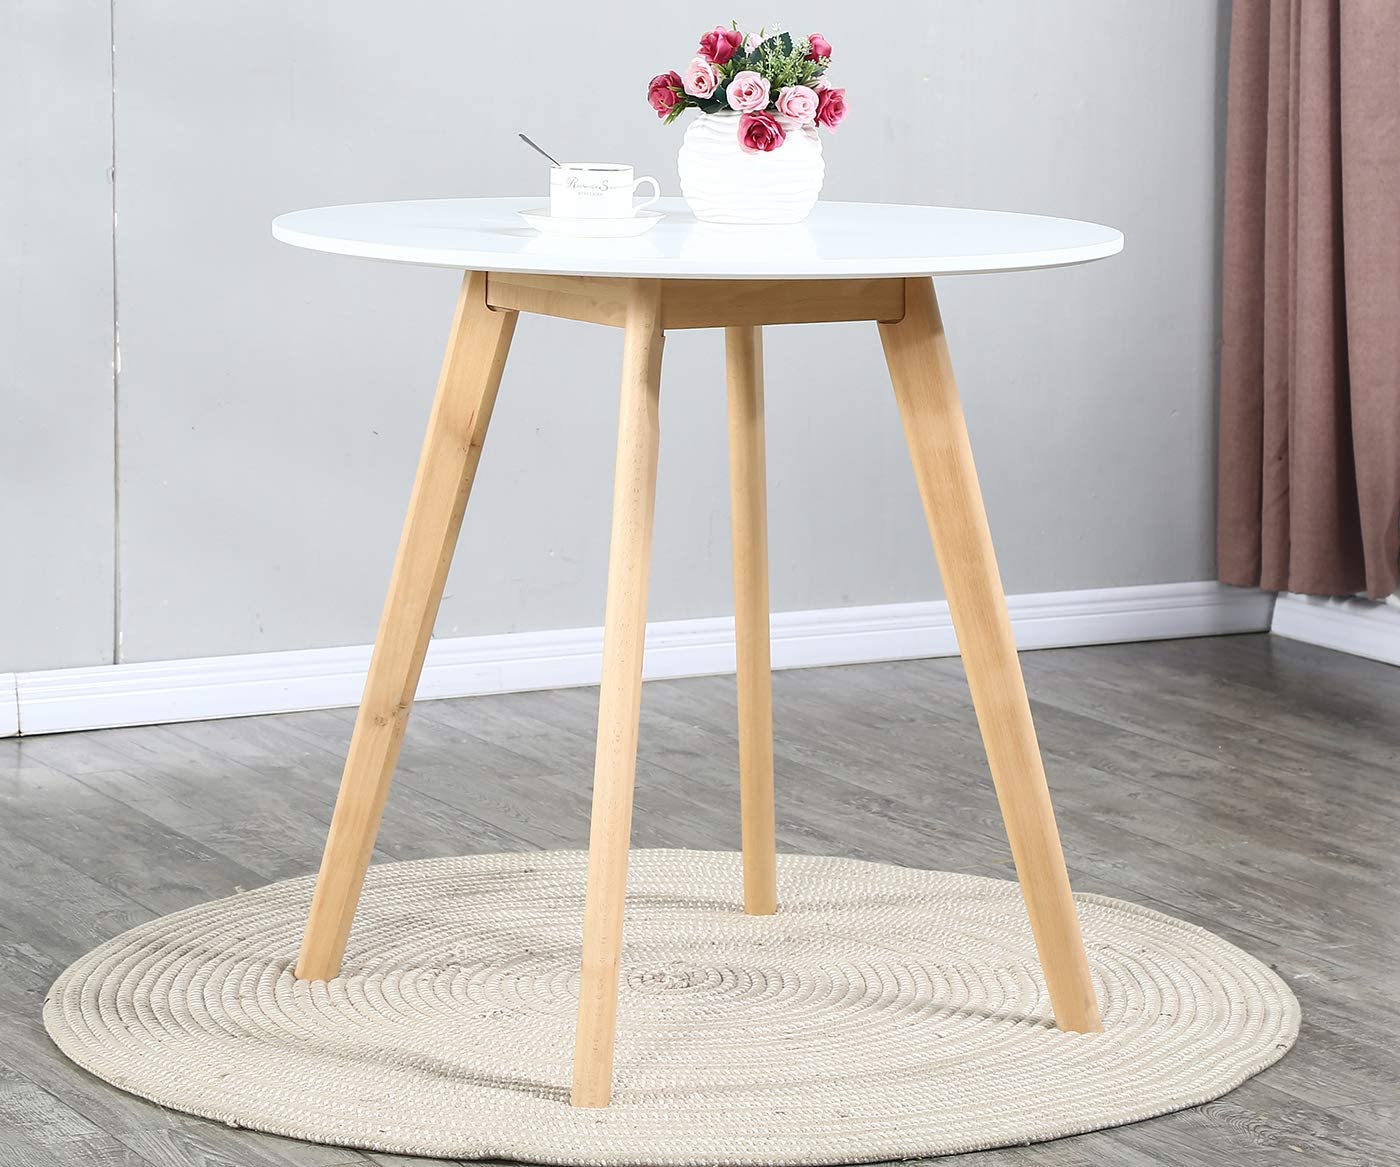 B08R7CV4K8 Modern Round Dining Table 31.2", Small White Wooden Dining Room Table for 2 or 4, Easy Assemble Leisure Coffee Table for Kitchen, Dining Room and Living Room, 31.2" X 29"